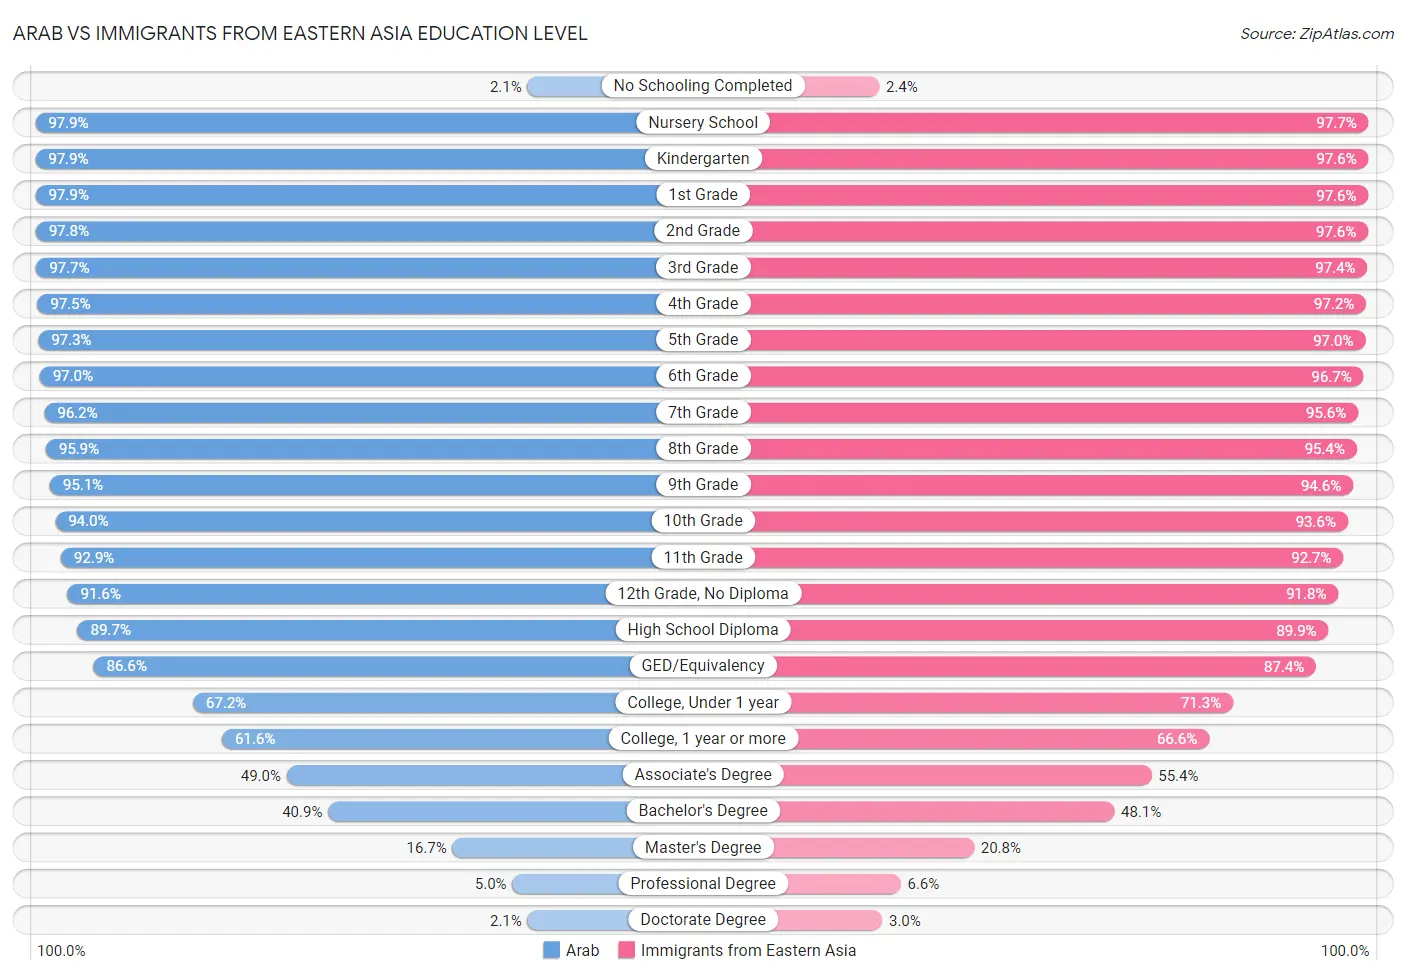 Arab vs Immigrants from Eastern Asia Education Level